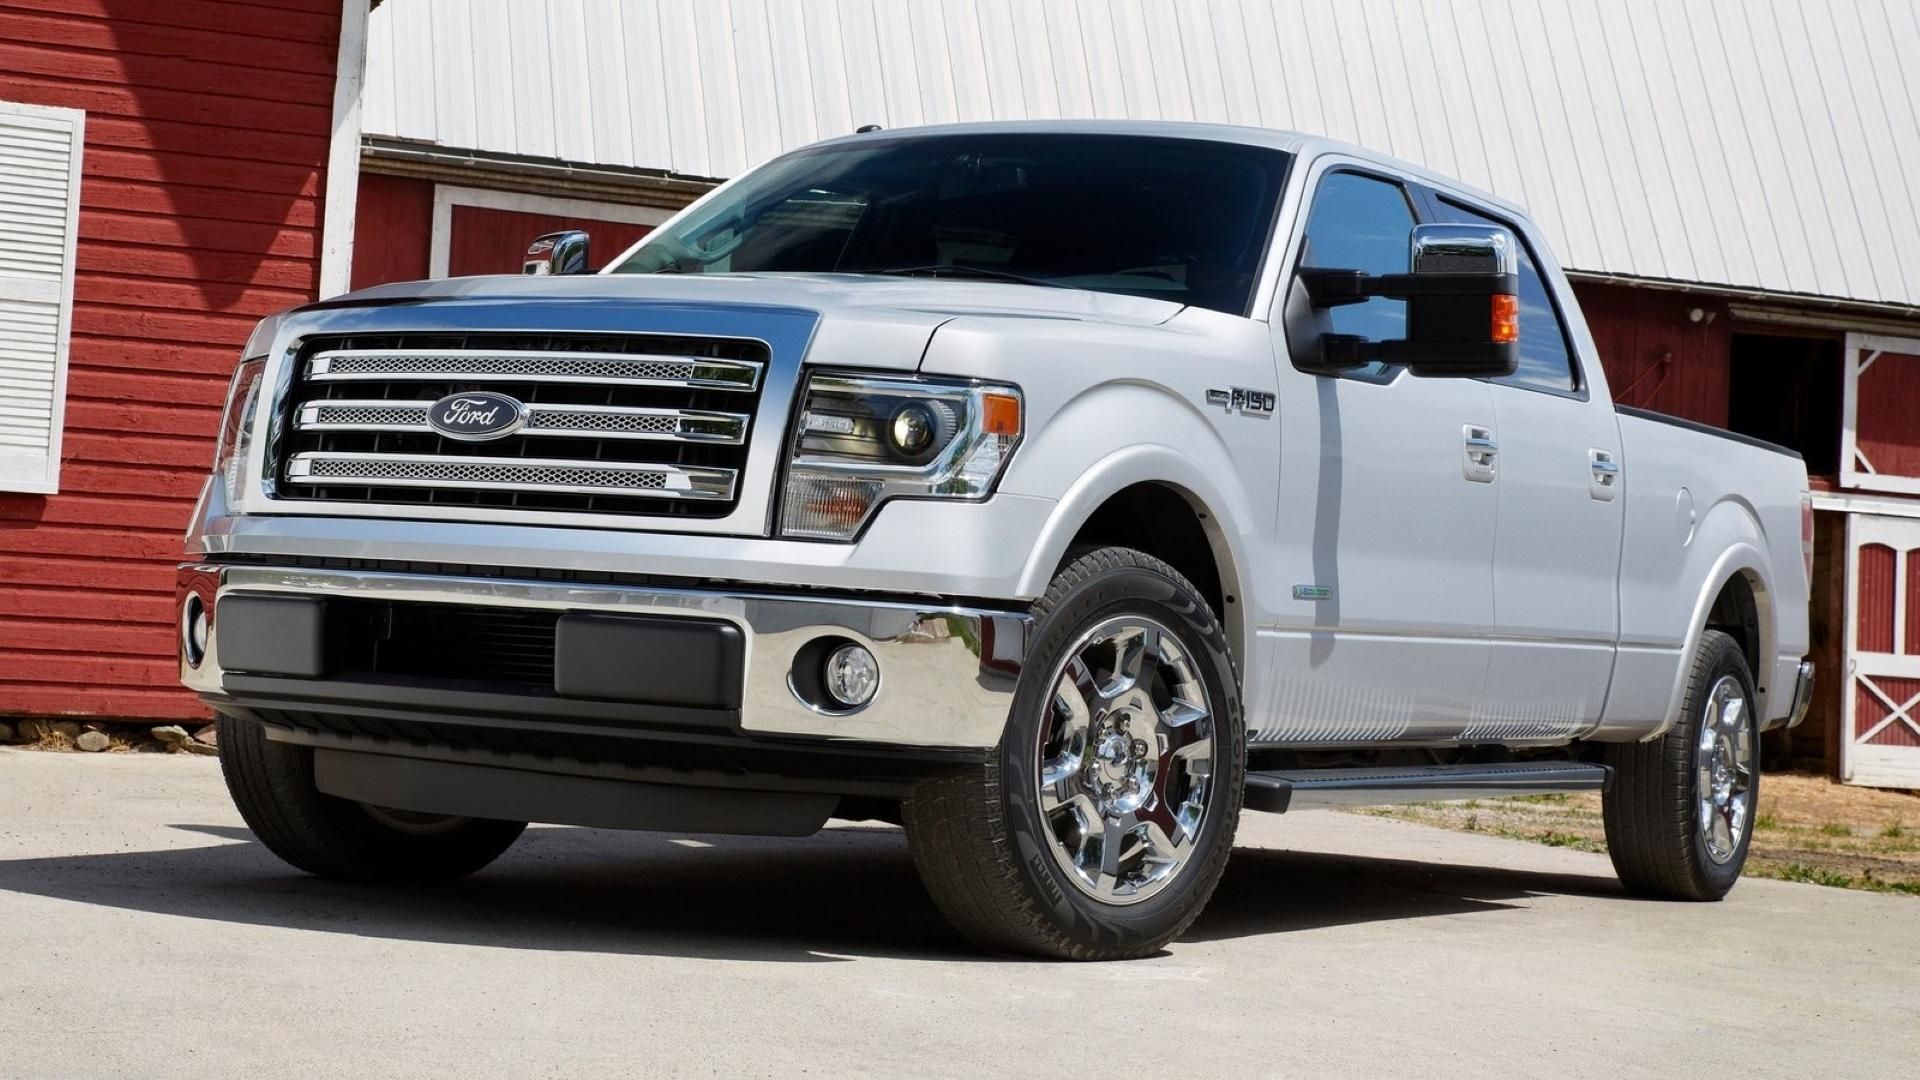 2013 Ford F-150 - Front Angle